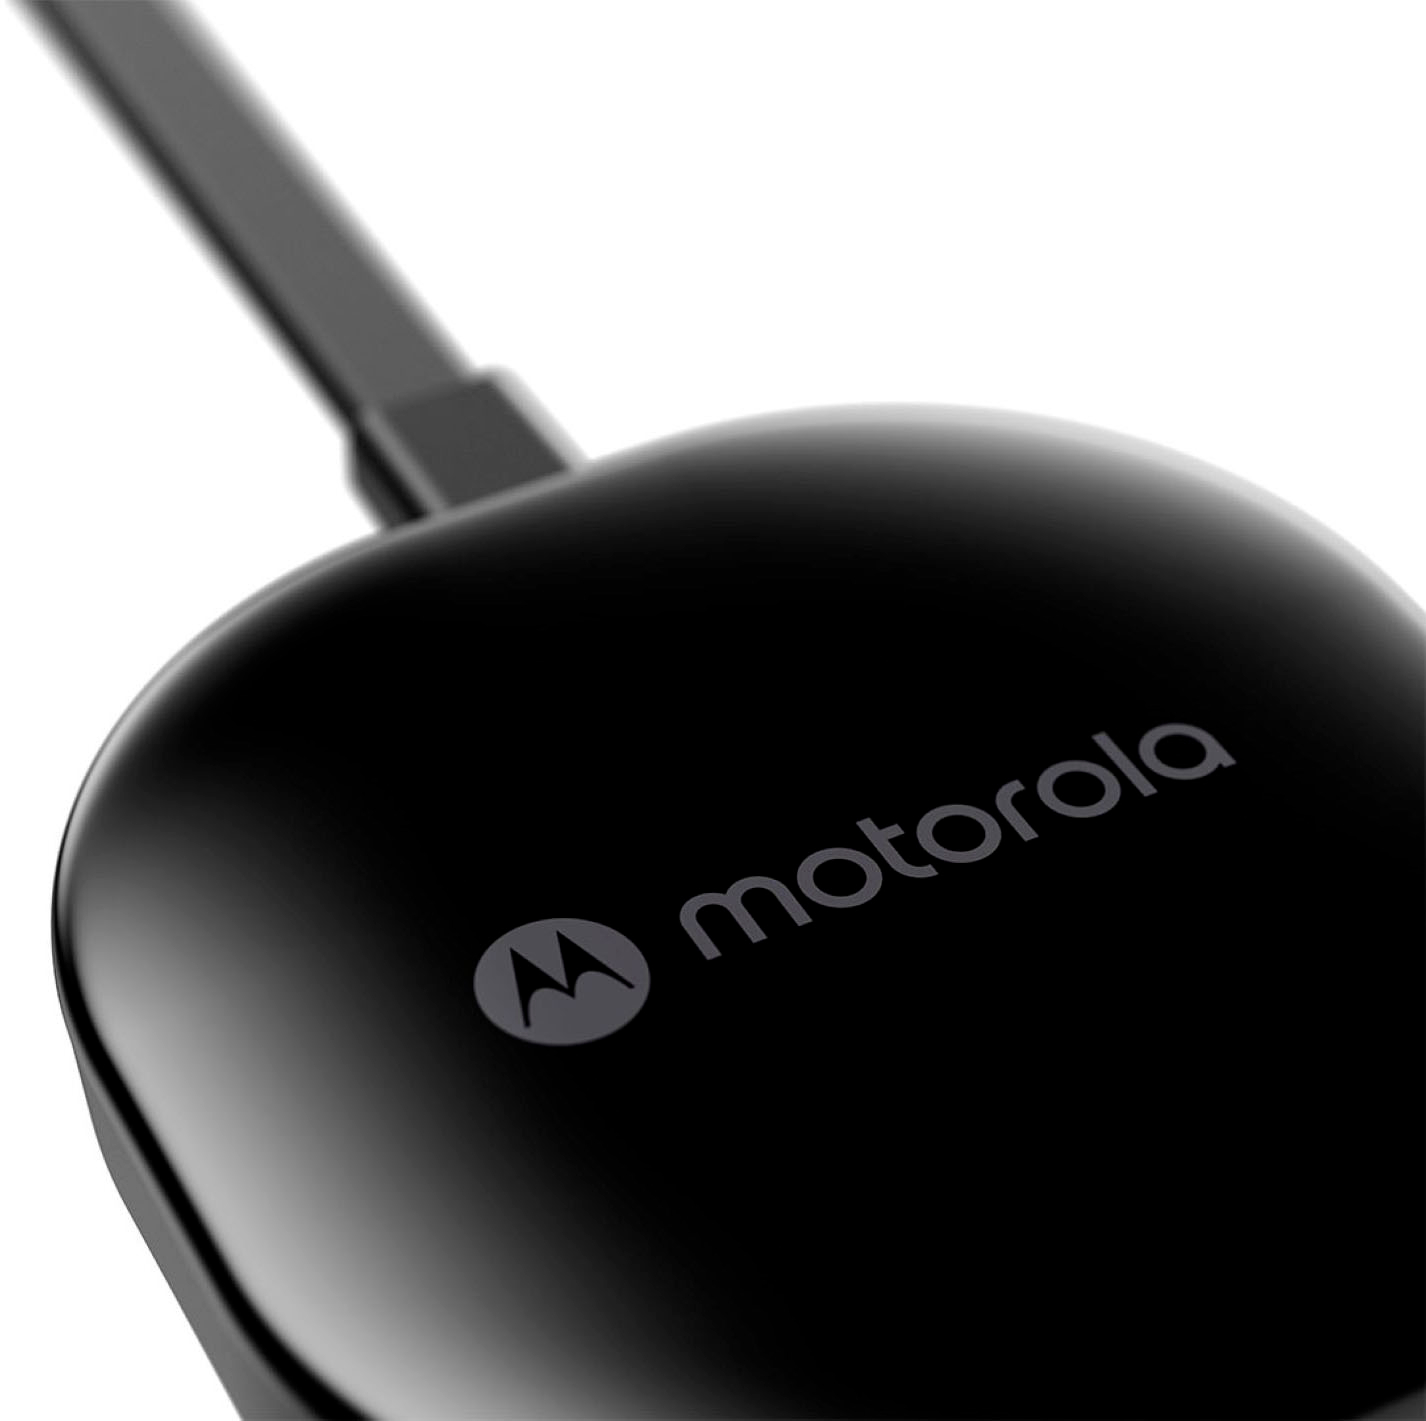 Motorola's popular wireless Android Auto adapter is now just $70 in this  limited-time deal